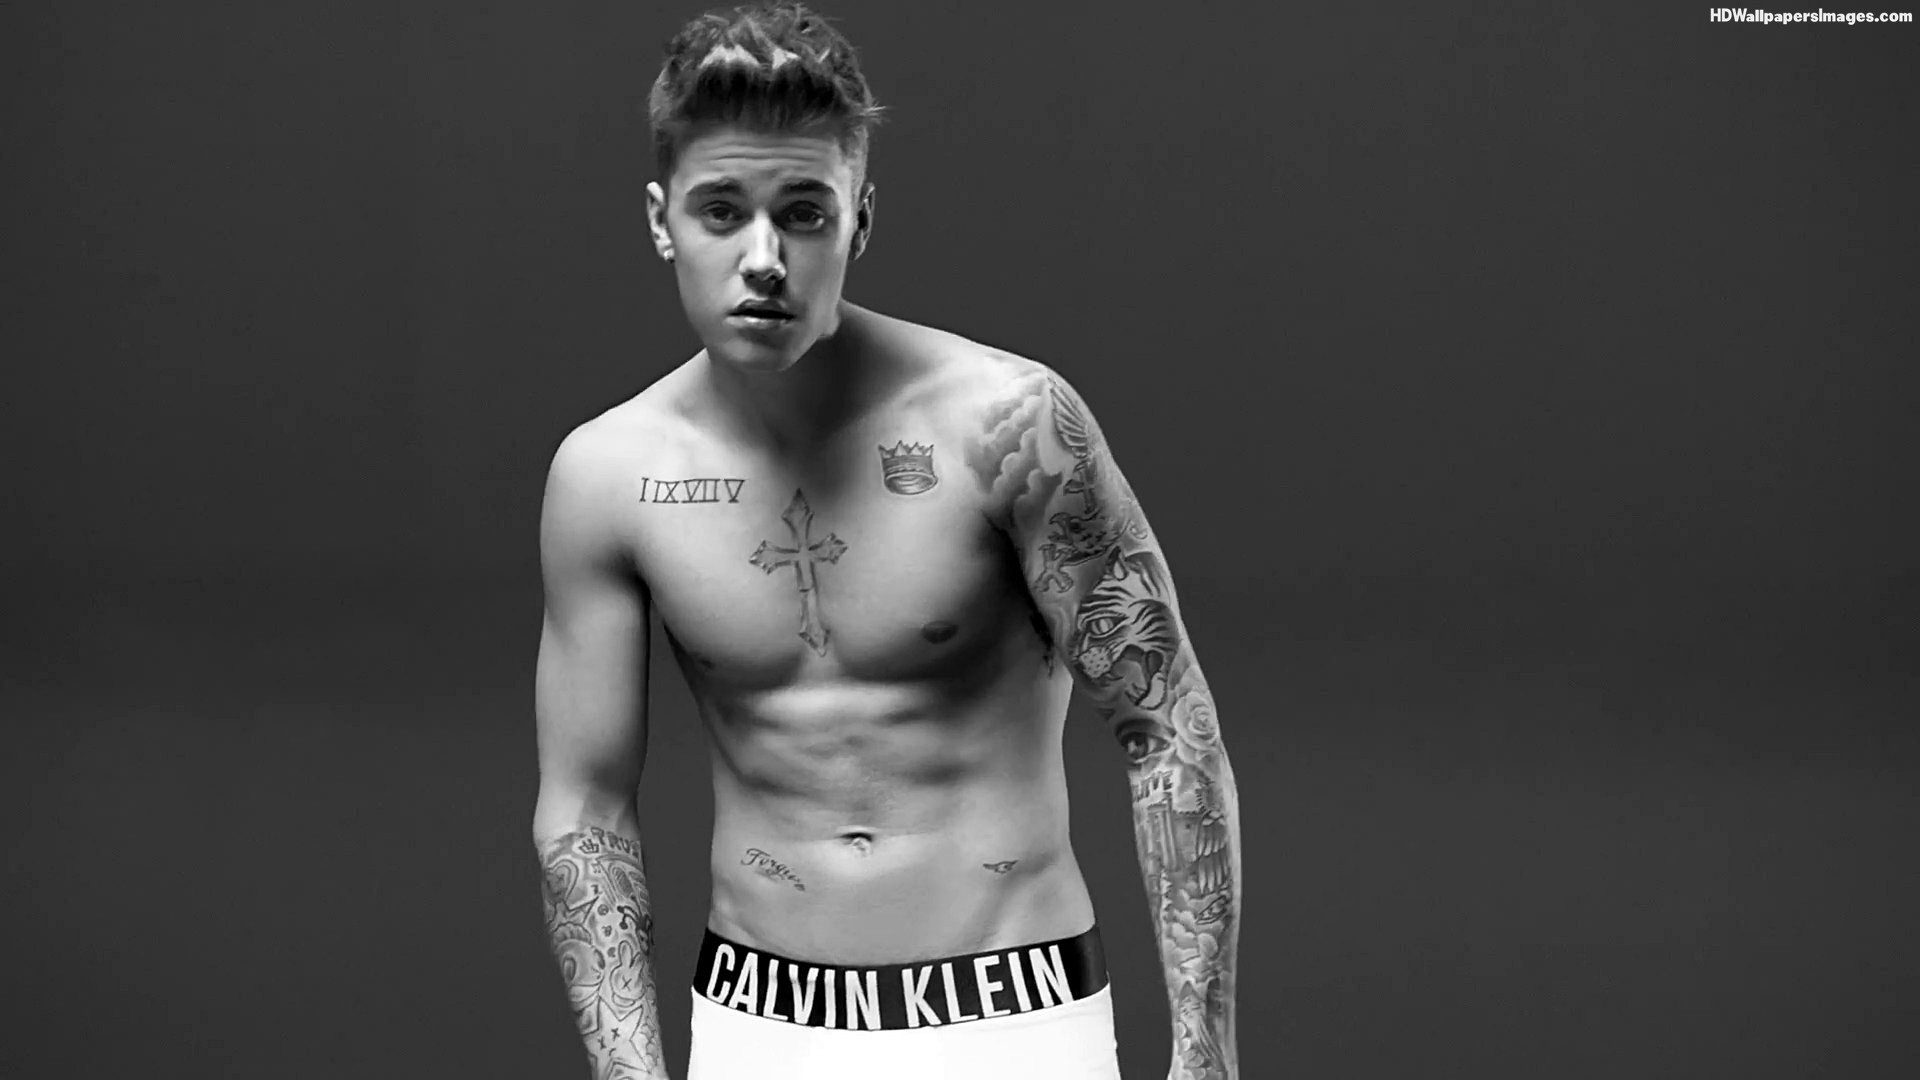 10 New Justin Bieber 2015 Wallpapers FULL HD 1080p For PC Background